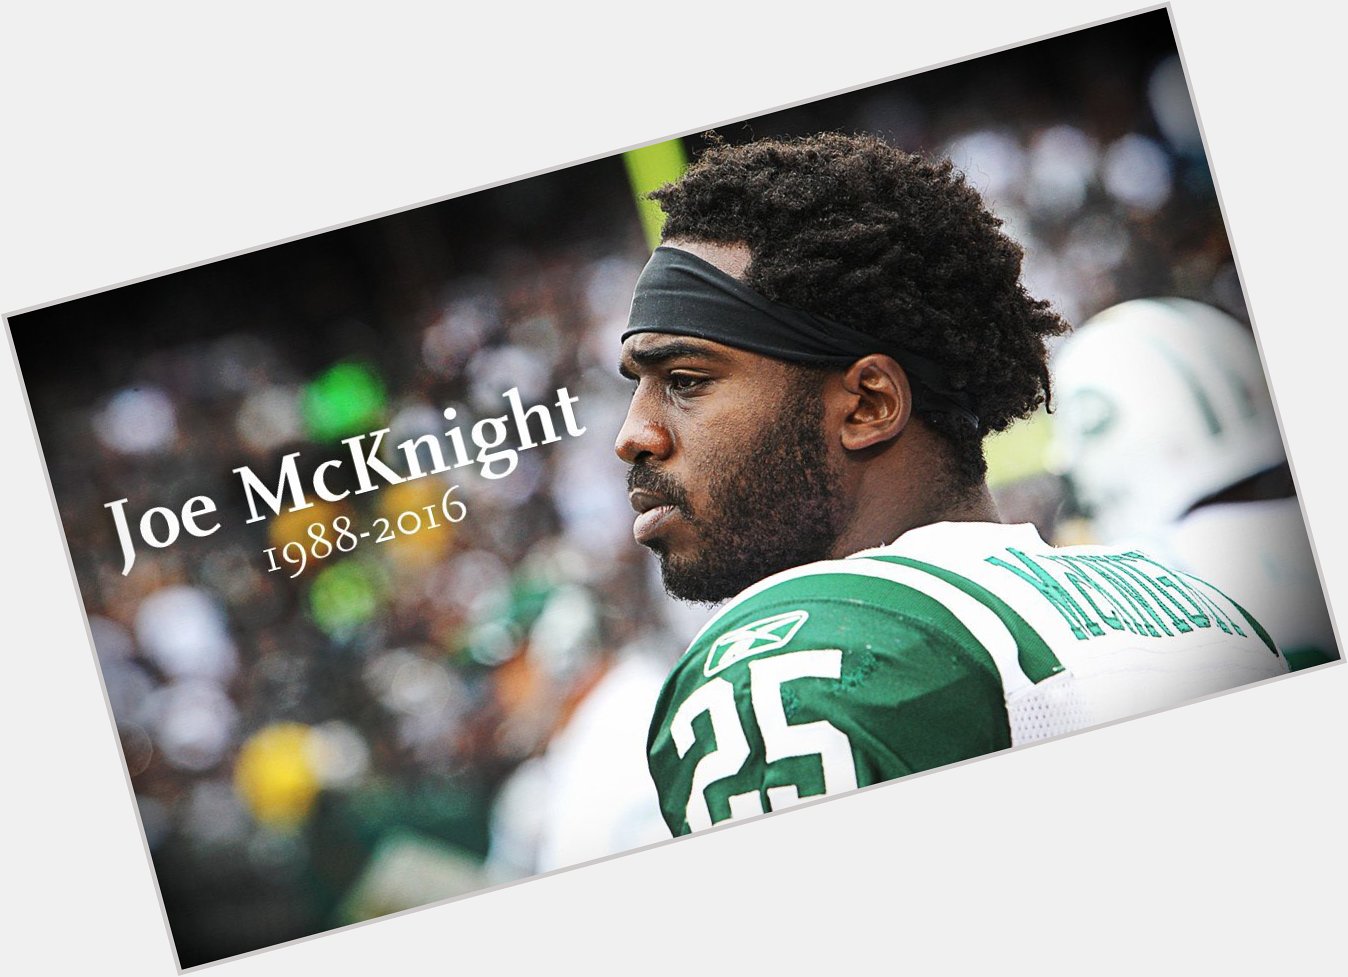 Happy birthday to the great Joe McKnight who would have turned 33 today.

Gone but never forgotten. 